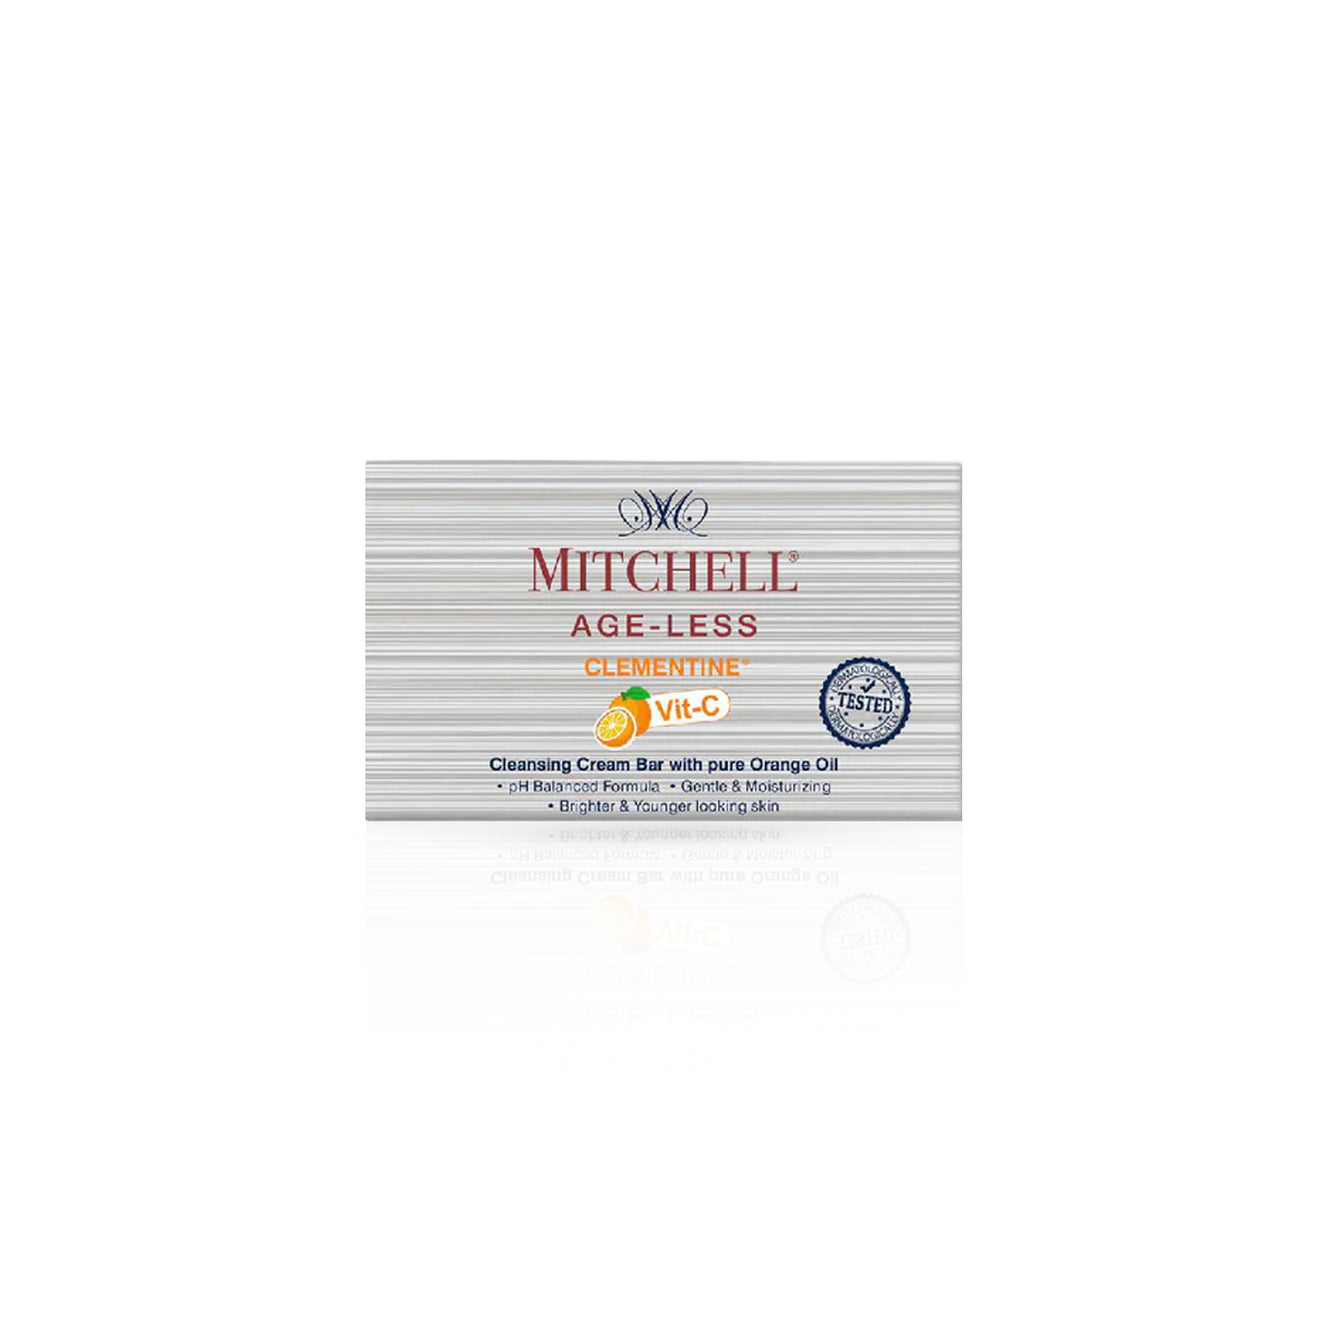 Ageless Cleansing Cream Bar With Pure Orange Oil - Vitamin C Soap - 125g Mitchell Brands - Mitchell Brands - Skin Lightening, Skin Brightening, Fade Dark Spots, Shea Butter, Hair Growth Products